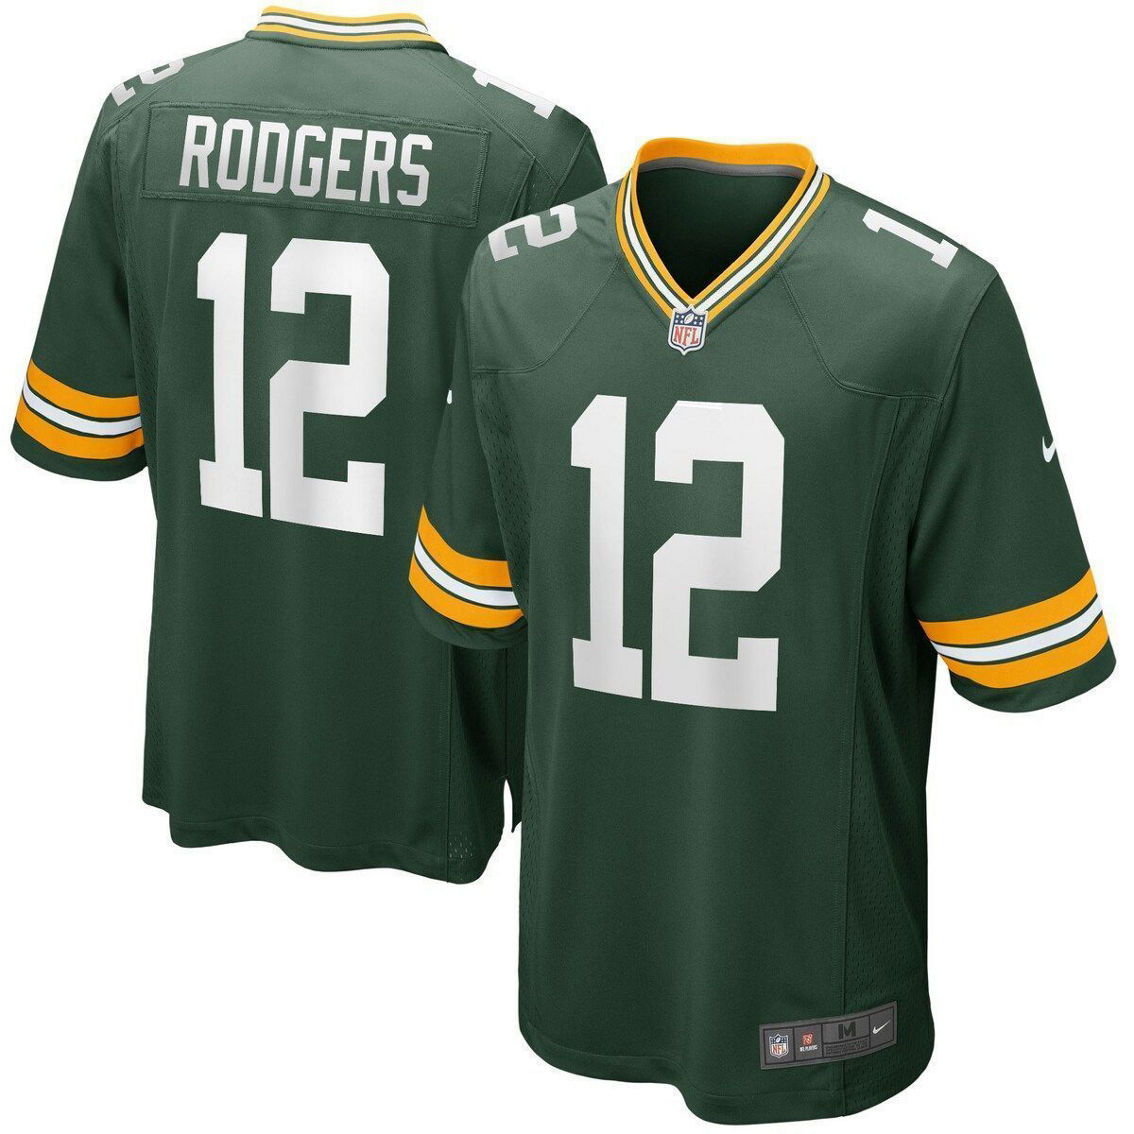 Nike Men's Green Bay Packers Aaron Rodgers Green Game Player Jersey - Image 2 of 4